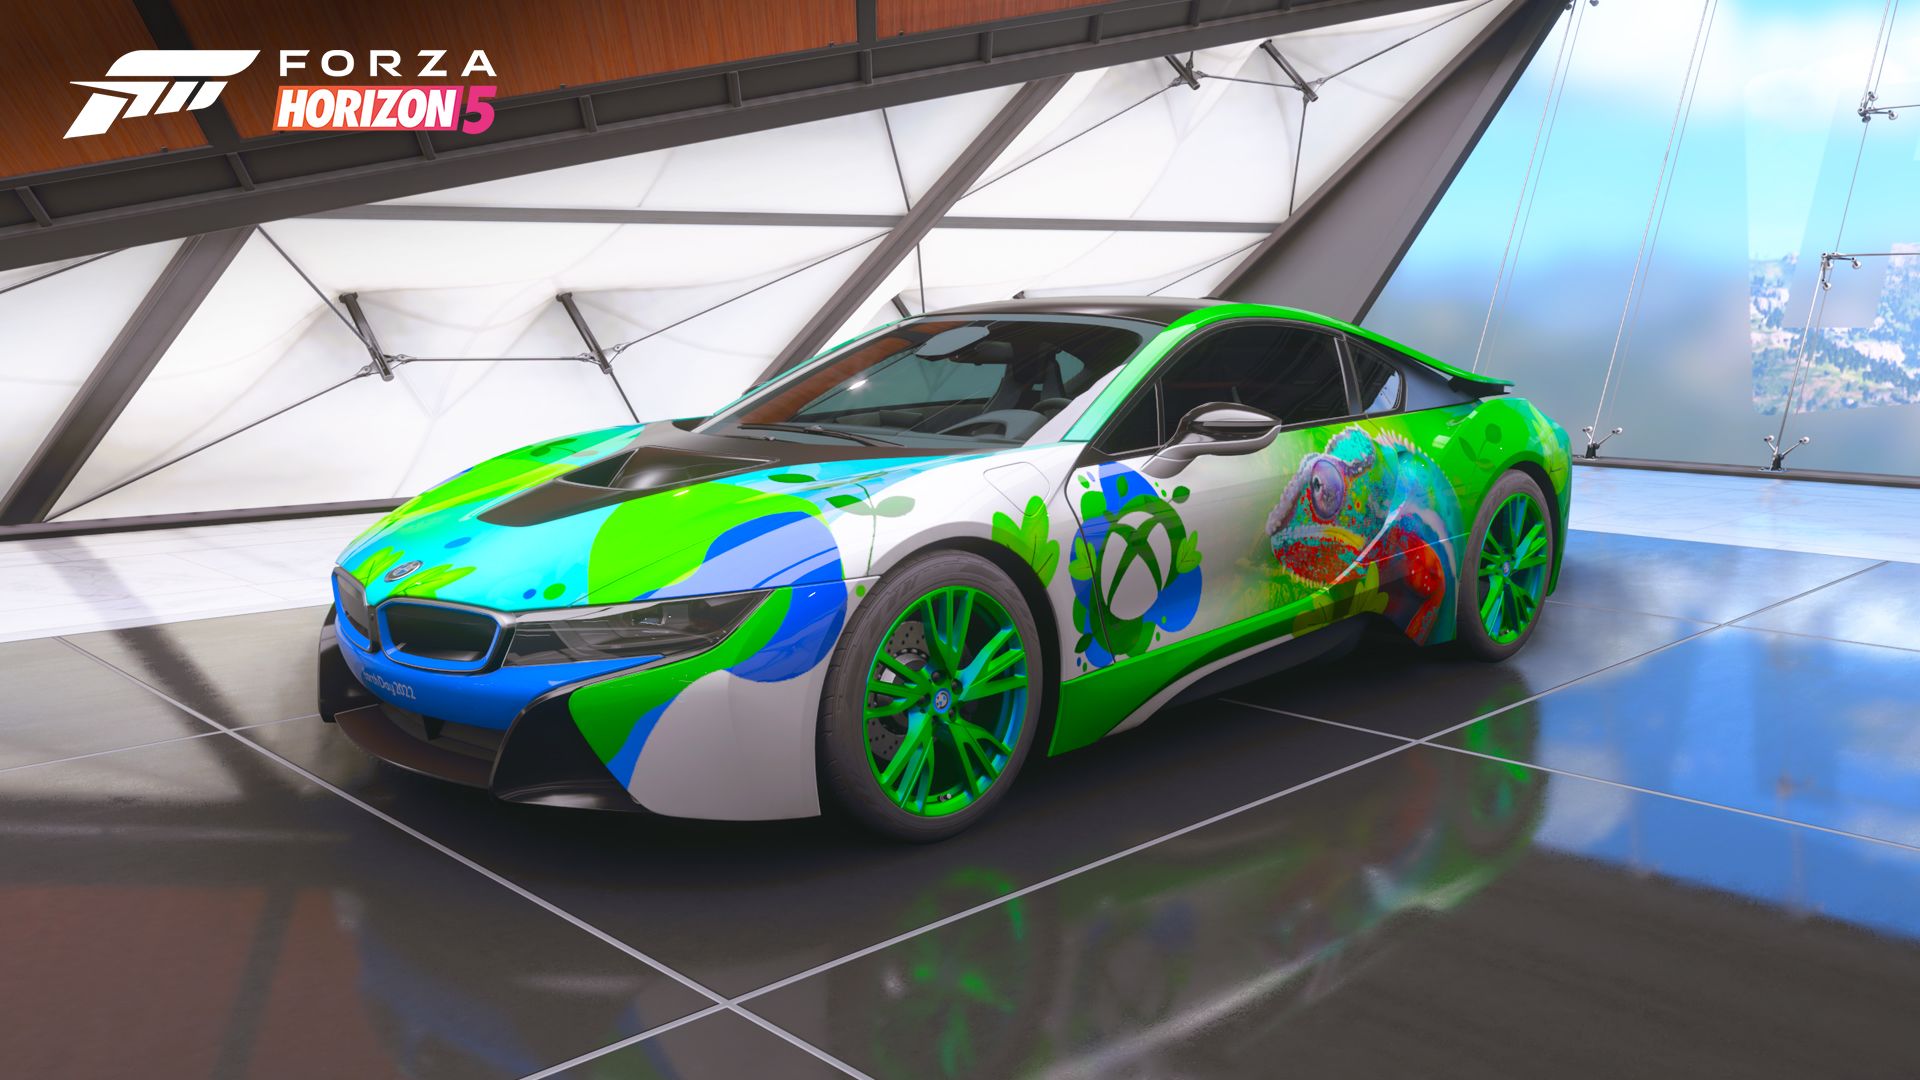 A 2015 BMW i8 car sits inside a sleek, professionally lit garage at the Mexico Horizon Festival. The car is painted in hues of blue, green, and white with shapes suggesting plant foliage. The Xbox logo is visible on the side of the car, next to a detailed image of a chameleon in similar hues.